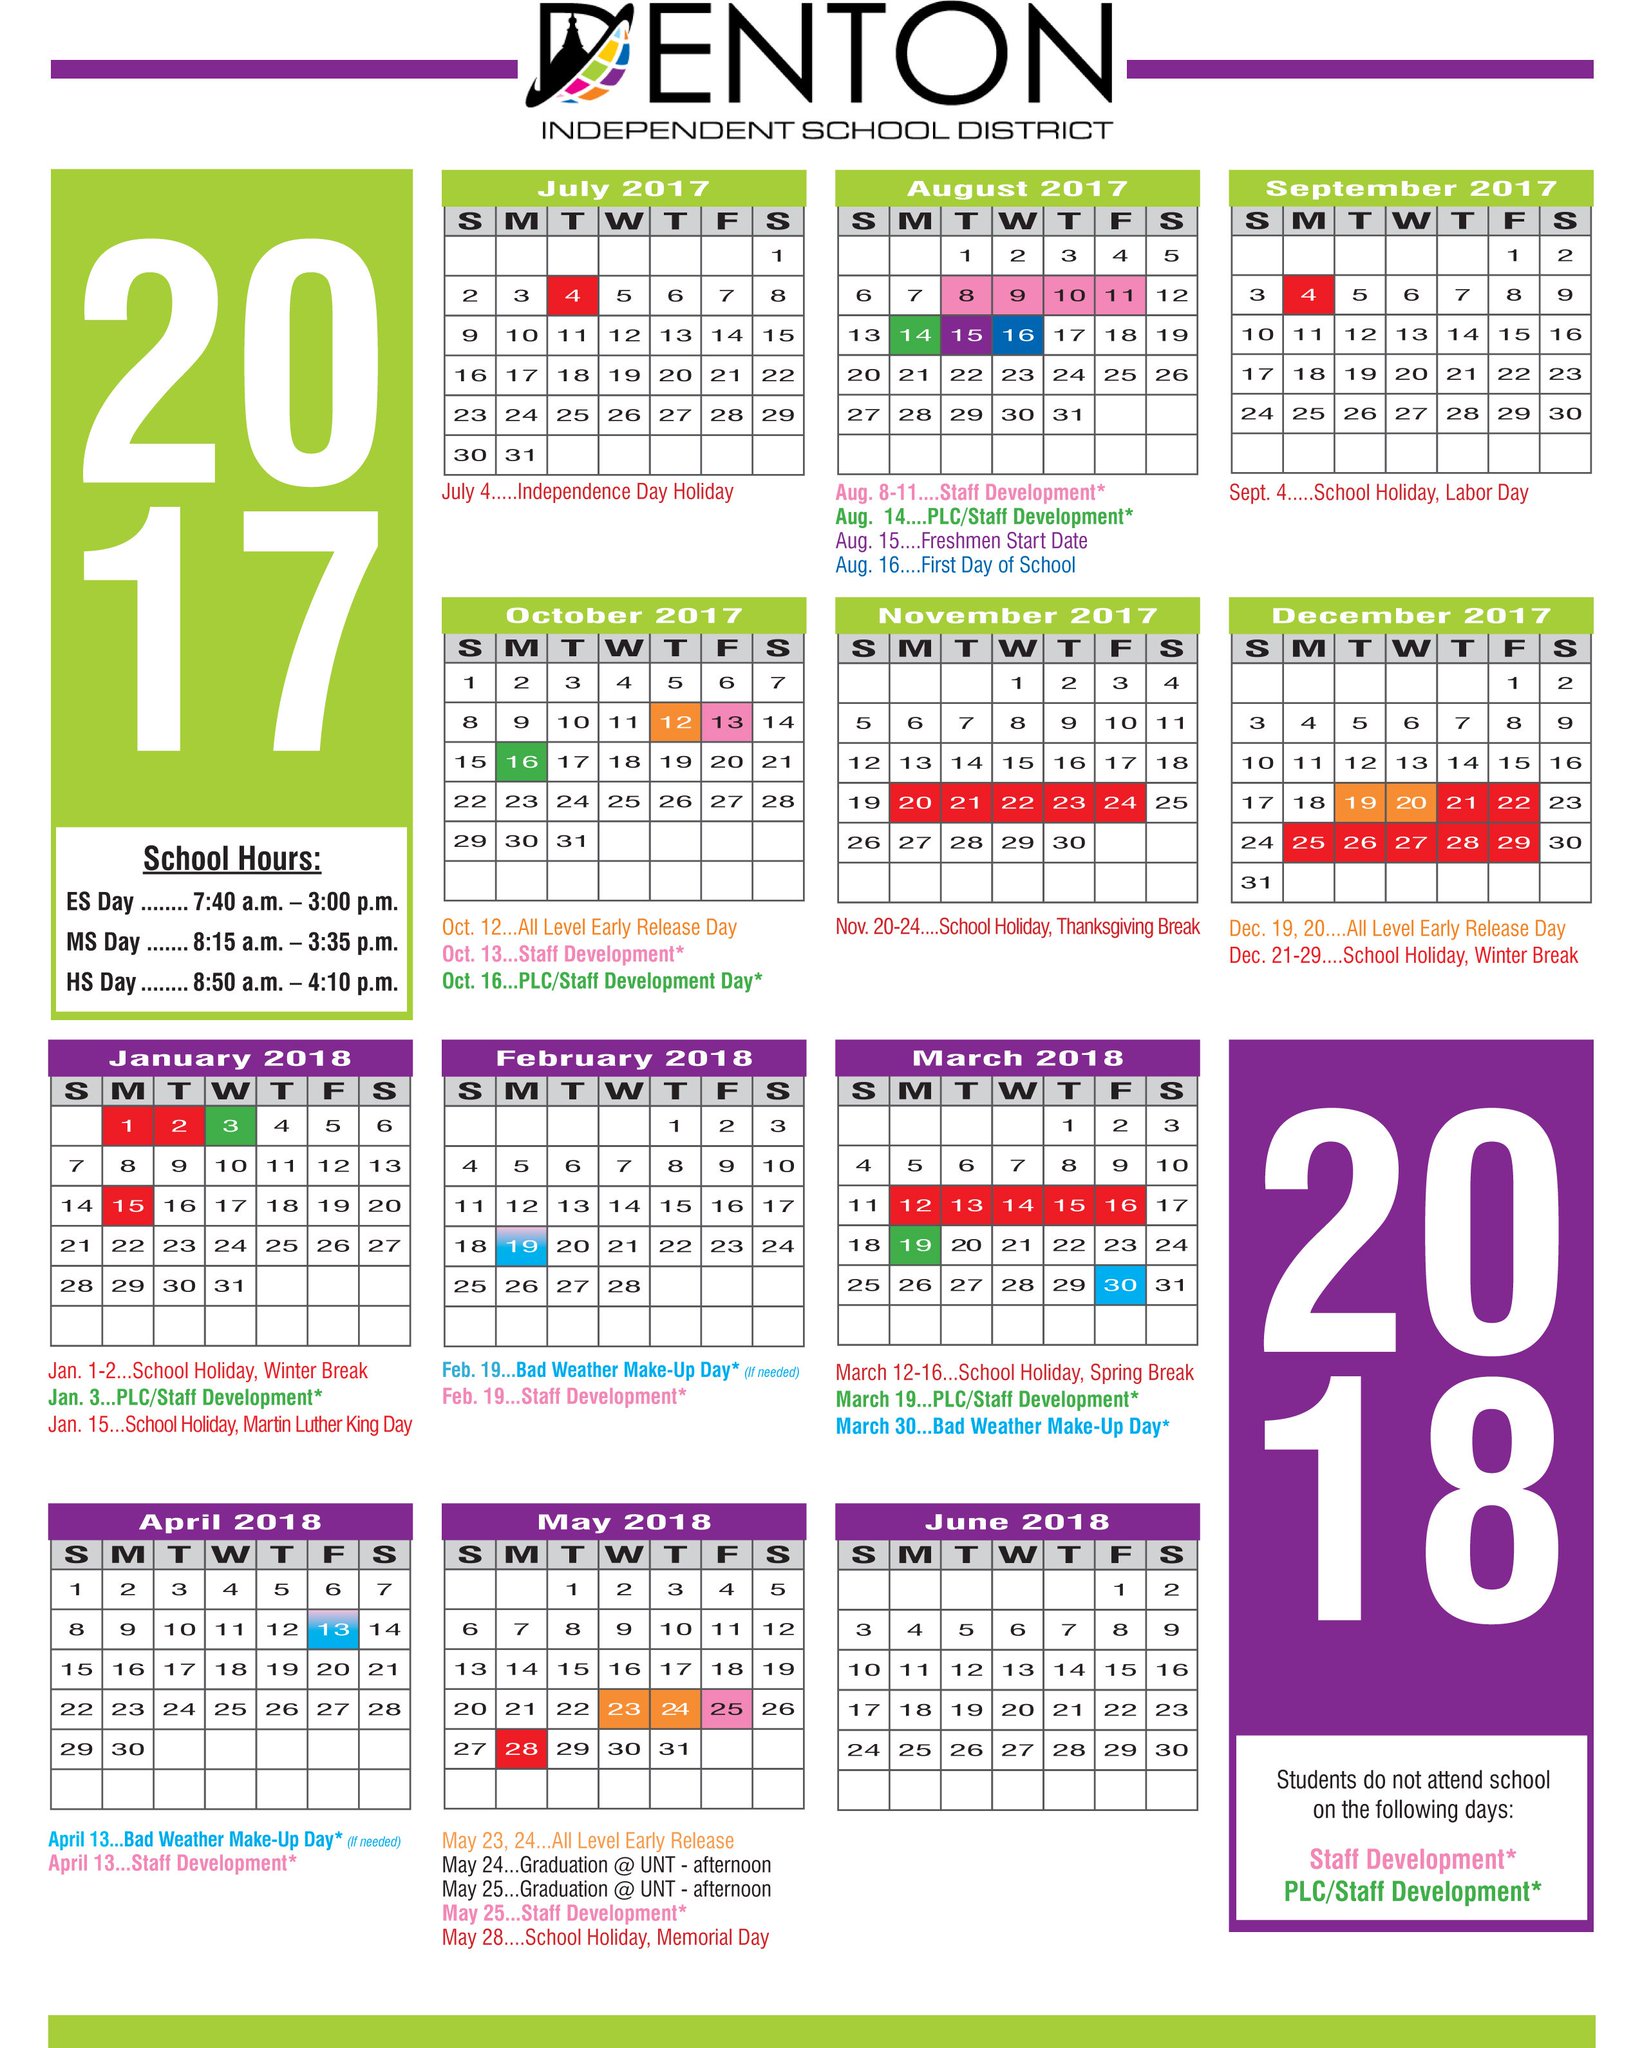 Denton Isd On Twitter The 2017 18 School Calendar Is Out Let The Spring And Winter Break Vacation Plans Begin And Yes We Are Done With School Before June Https T Co Jxyuvv2arp